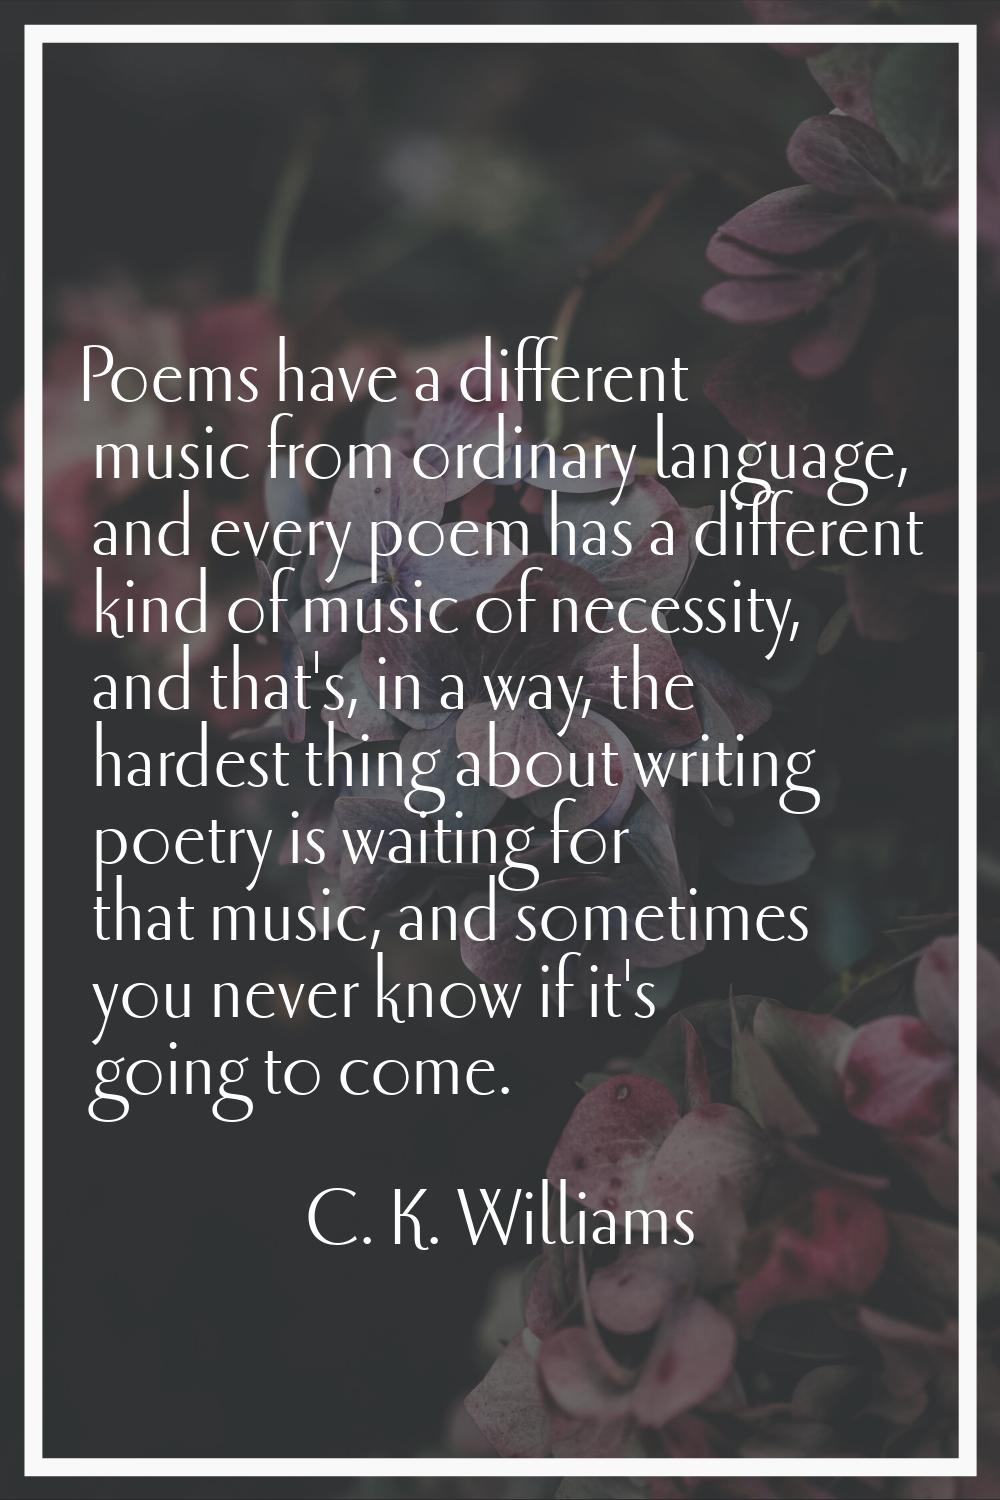 Poems have a different music from ordinary language, and every poem has a different kind of music o